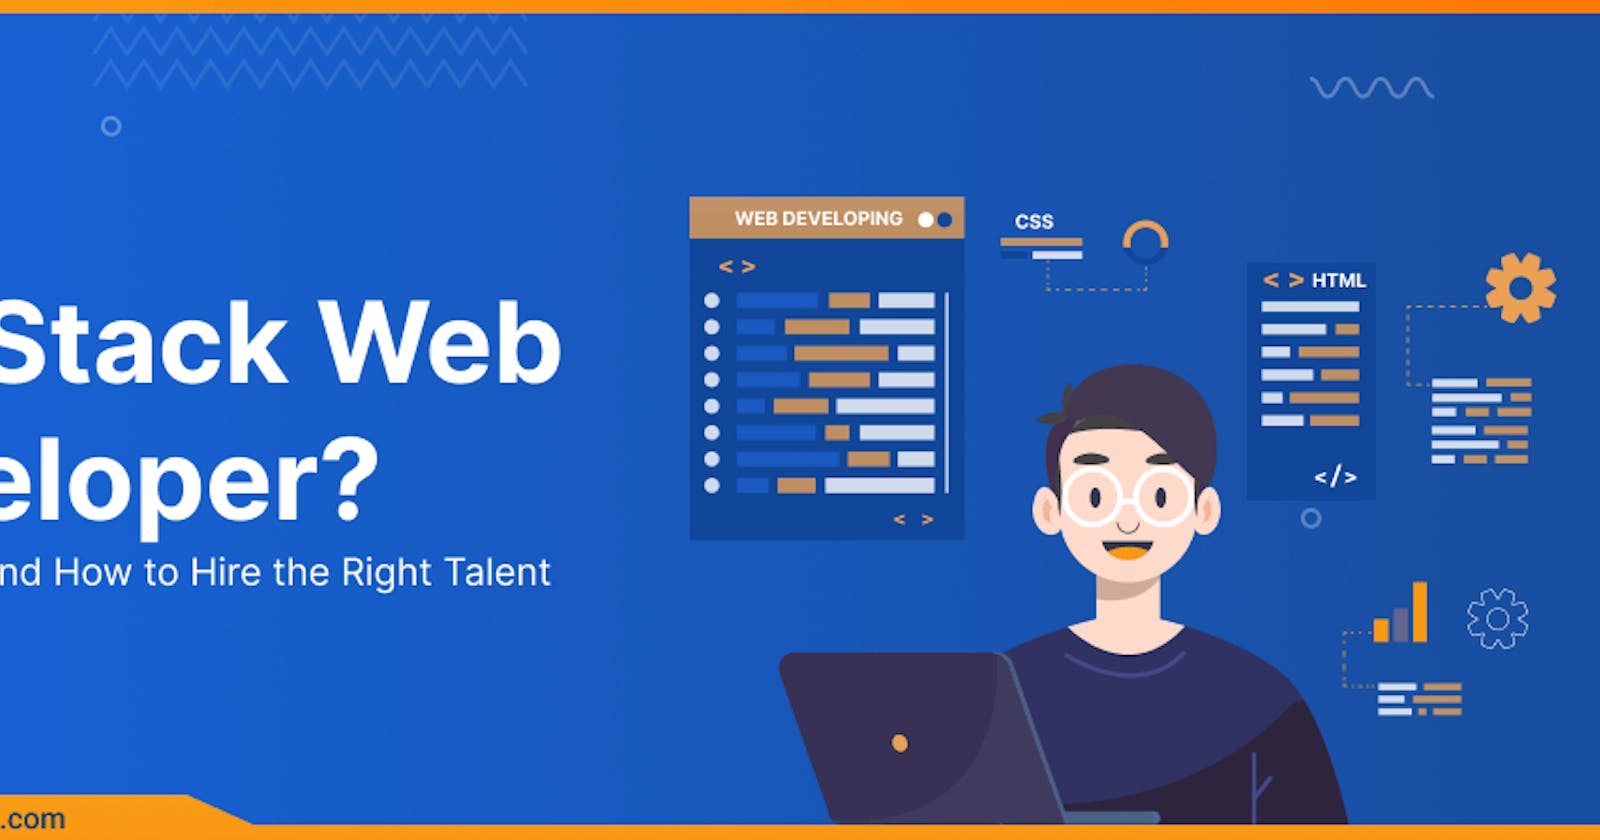 What is a Full Stack Web Developer? Why, When, and How to Hire the Right Talent